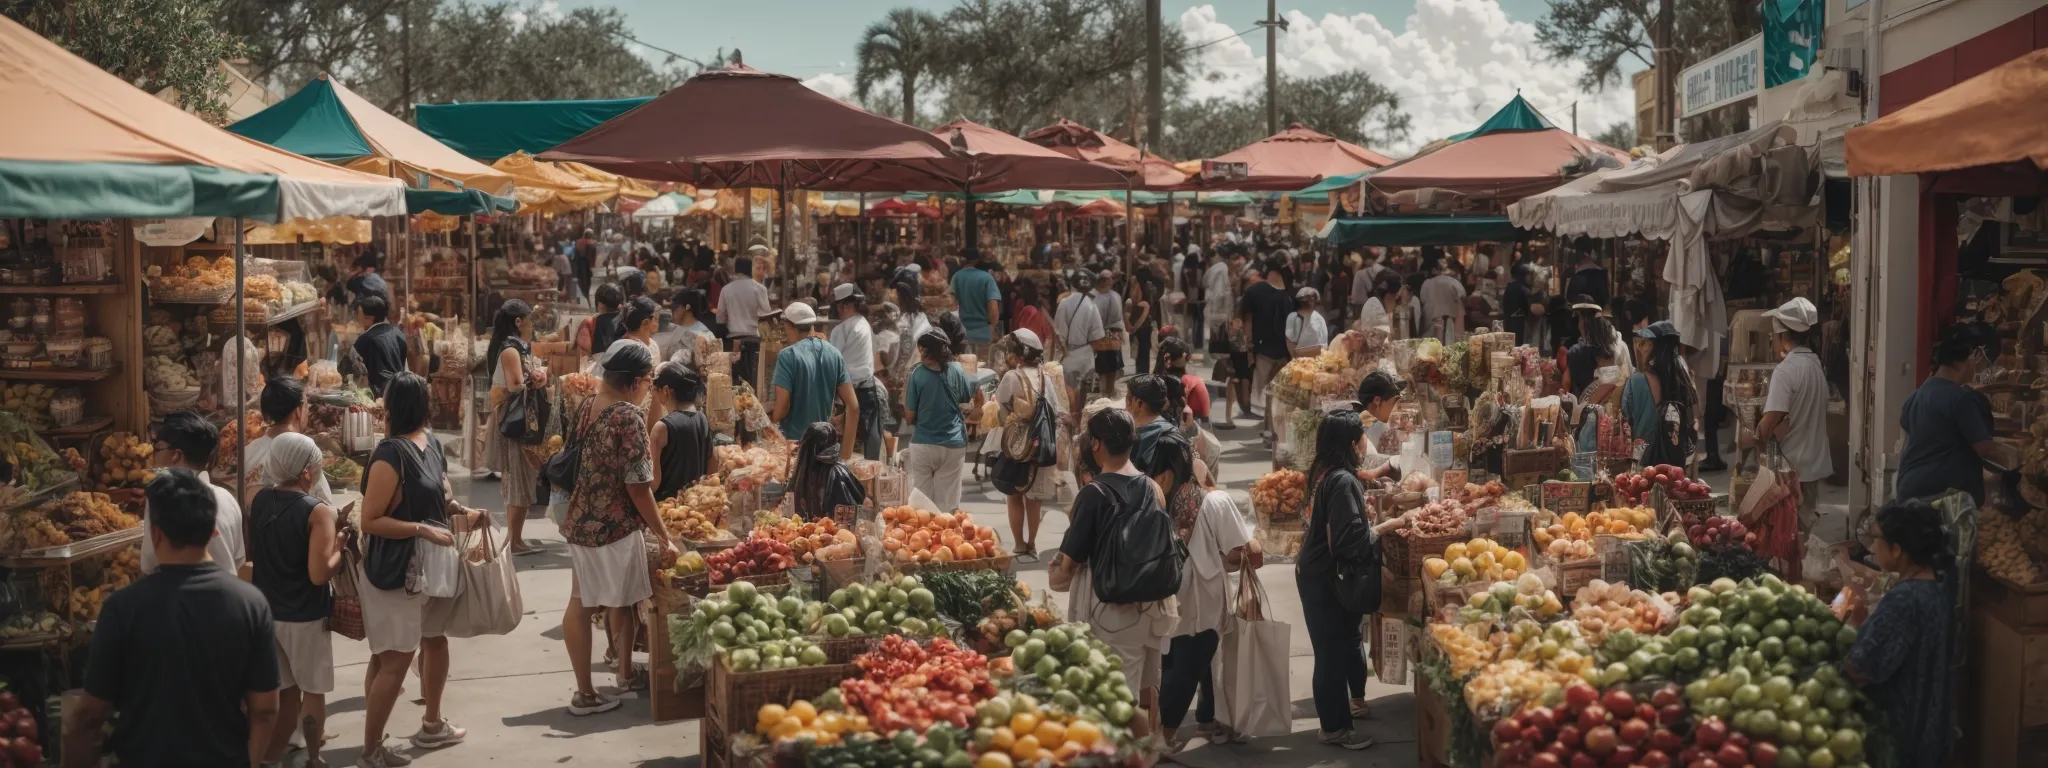 a bustling orlando marketplace with diverse vendors and engaged shoppers highlights local commerce and community.